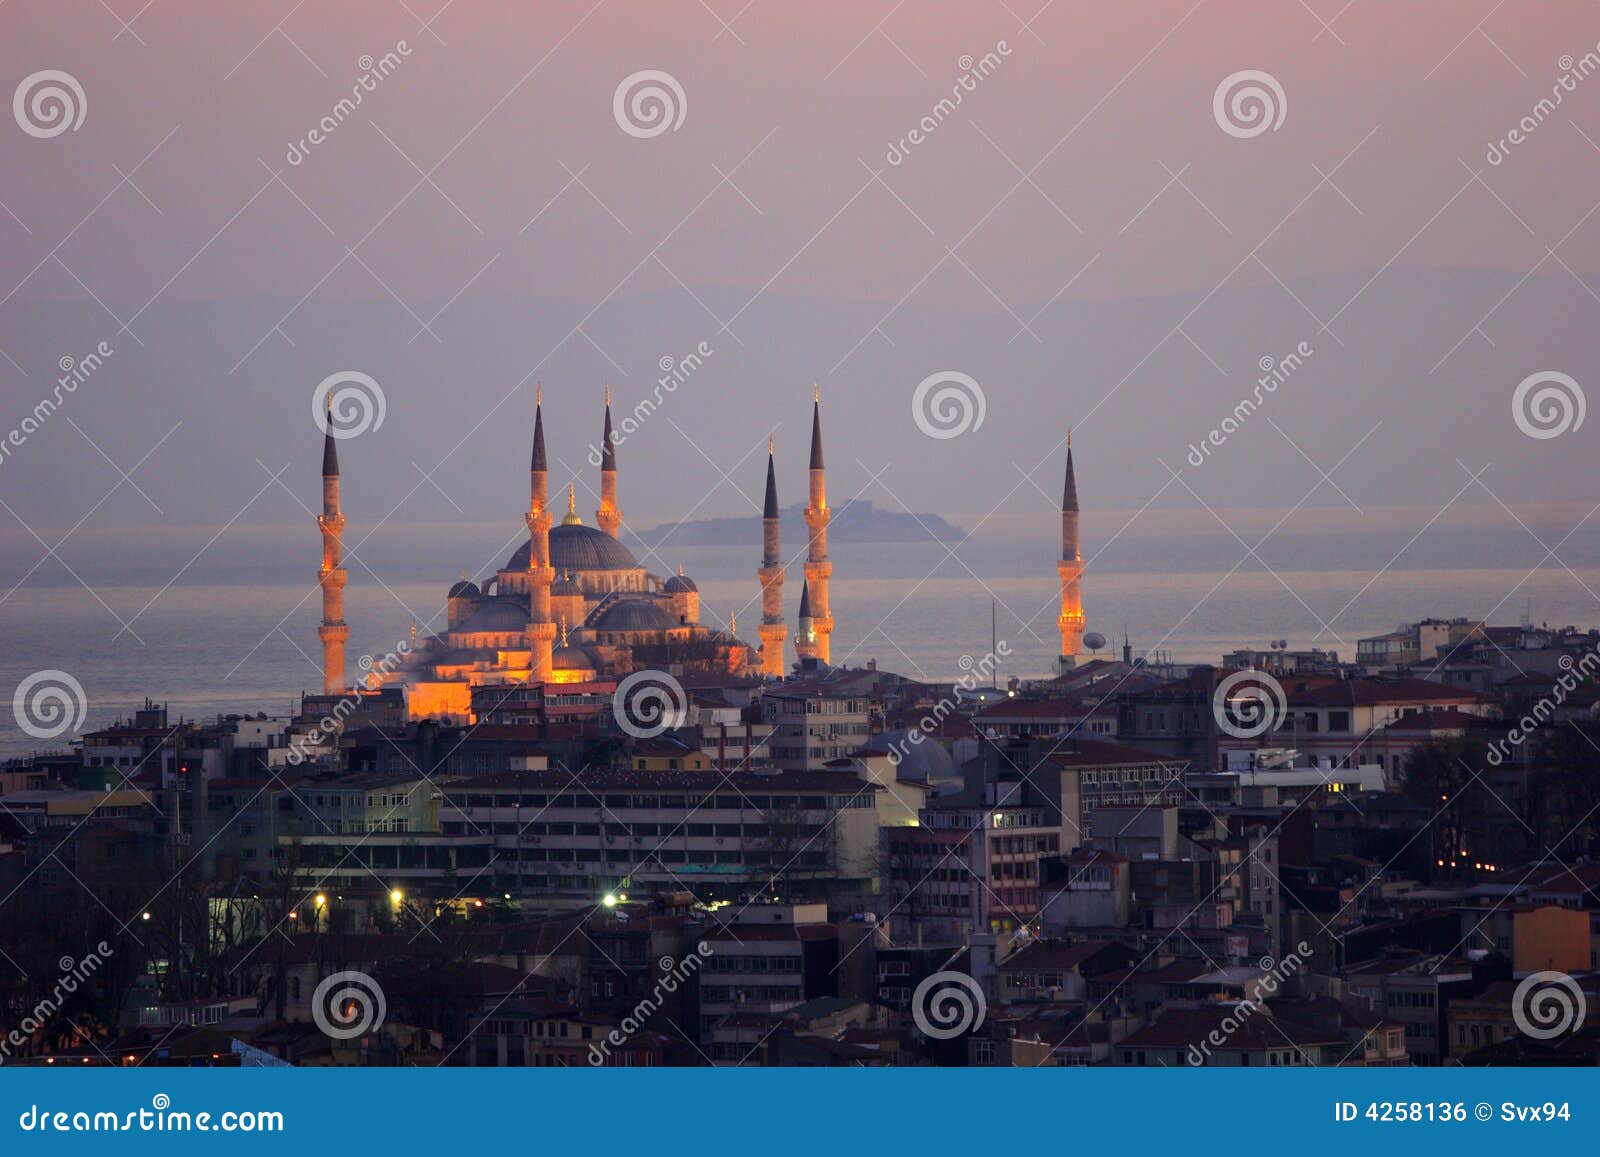 the sultan ahmed mosque - blue mosque of istanbul